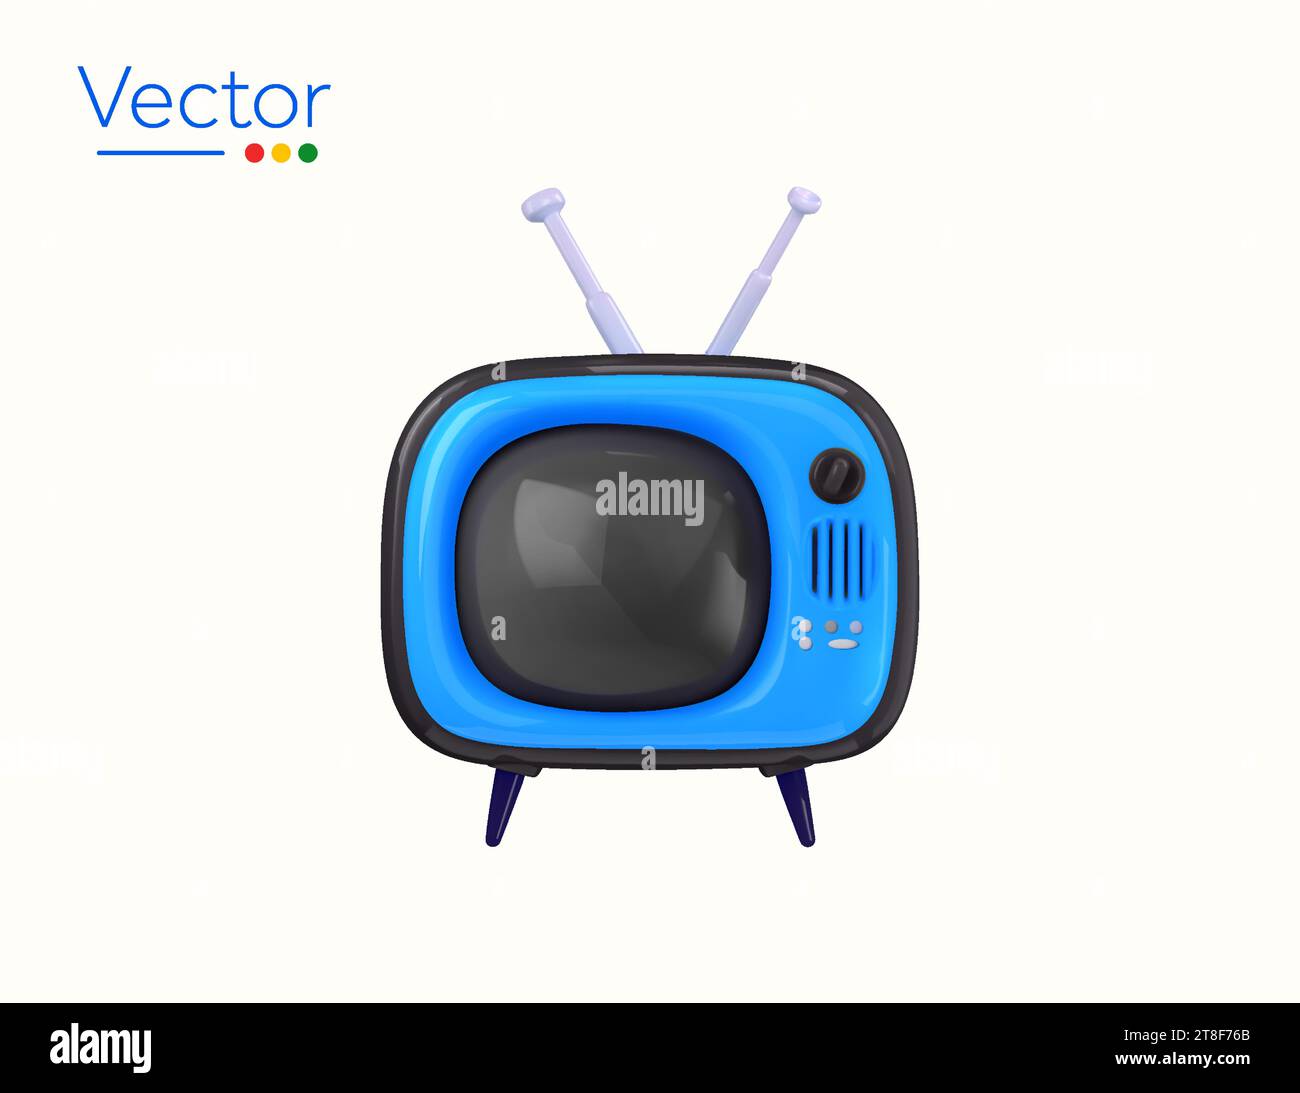 3d rendered blue classic analog television or TV with antenna, isolated on white background. Old technology icon. 90 century home appliance symbol. 3d Vector illustration. Vector illustration Stock Vector